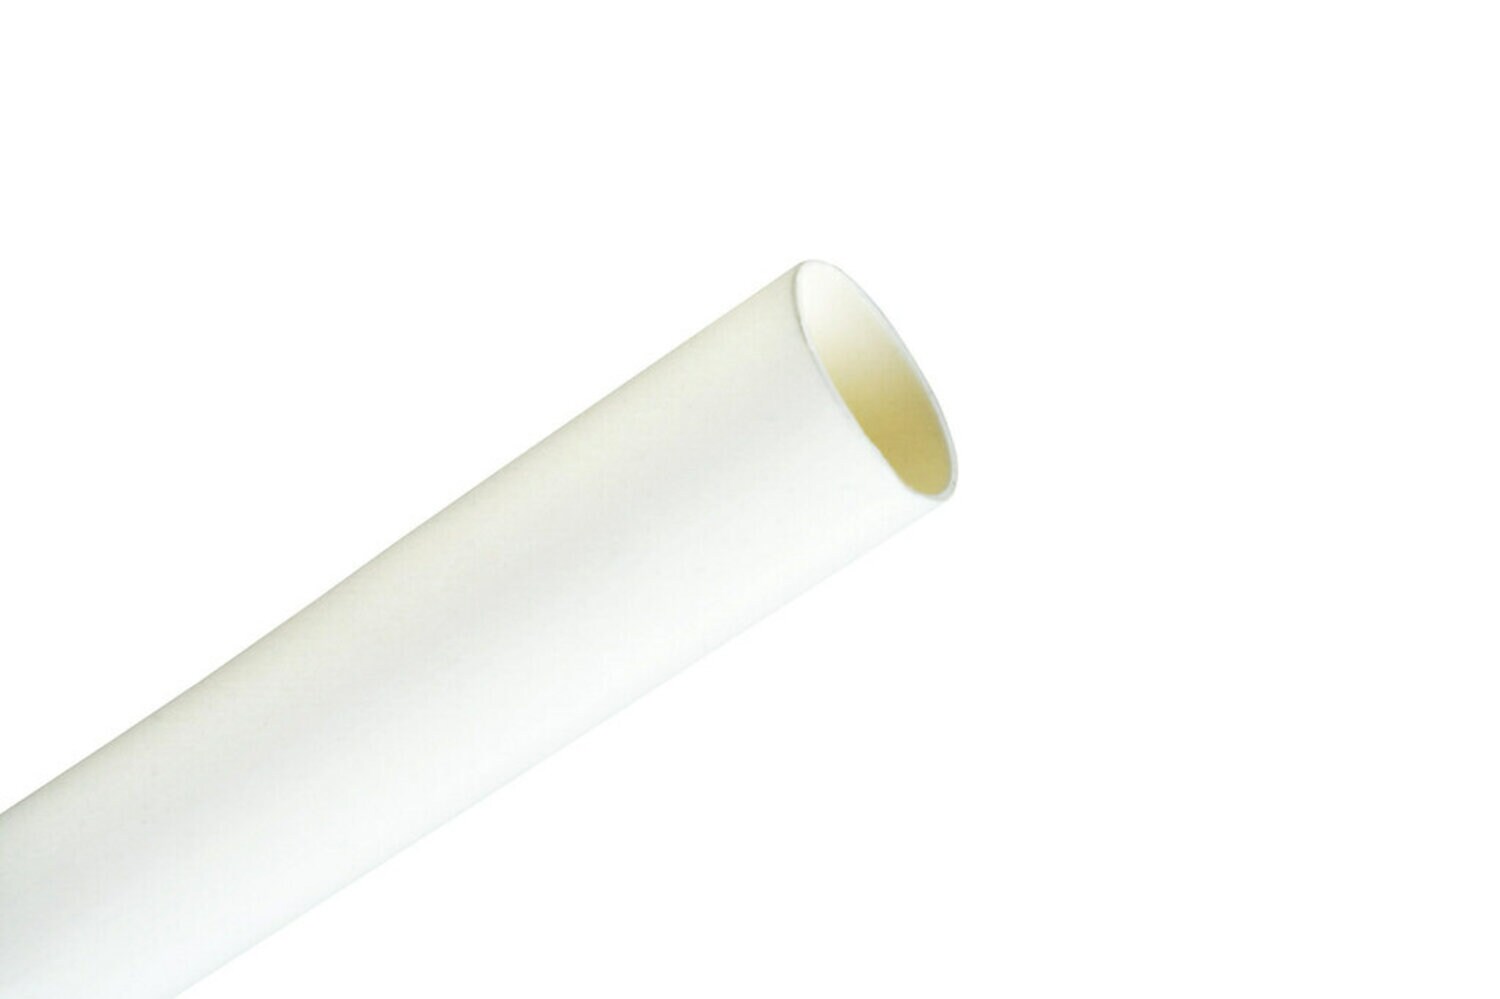 7010320995 - 3M Heat Shrink Thin-Wall Tubing FP-301-1/8-48"-White-250 Pcs, 48 in
Length sticks, 250 pieces/case